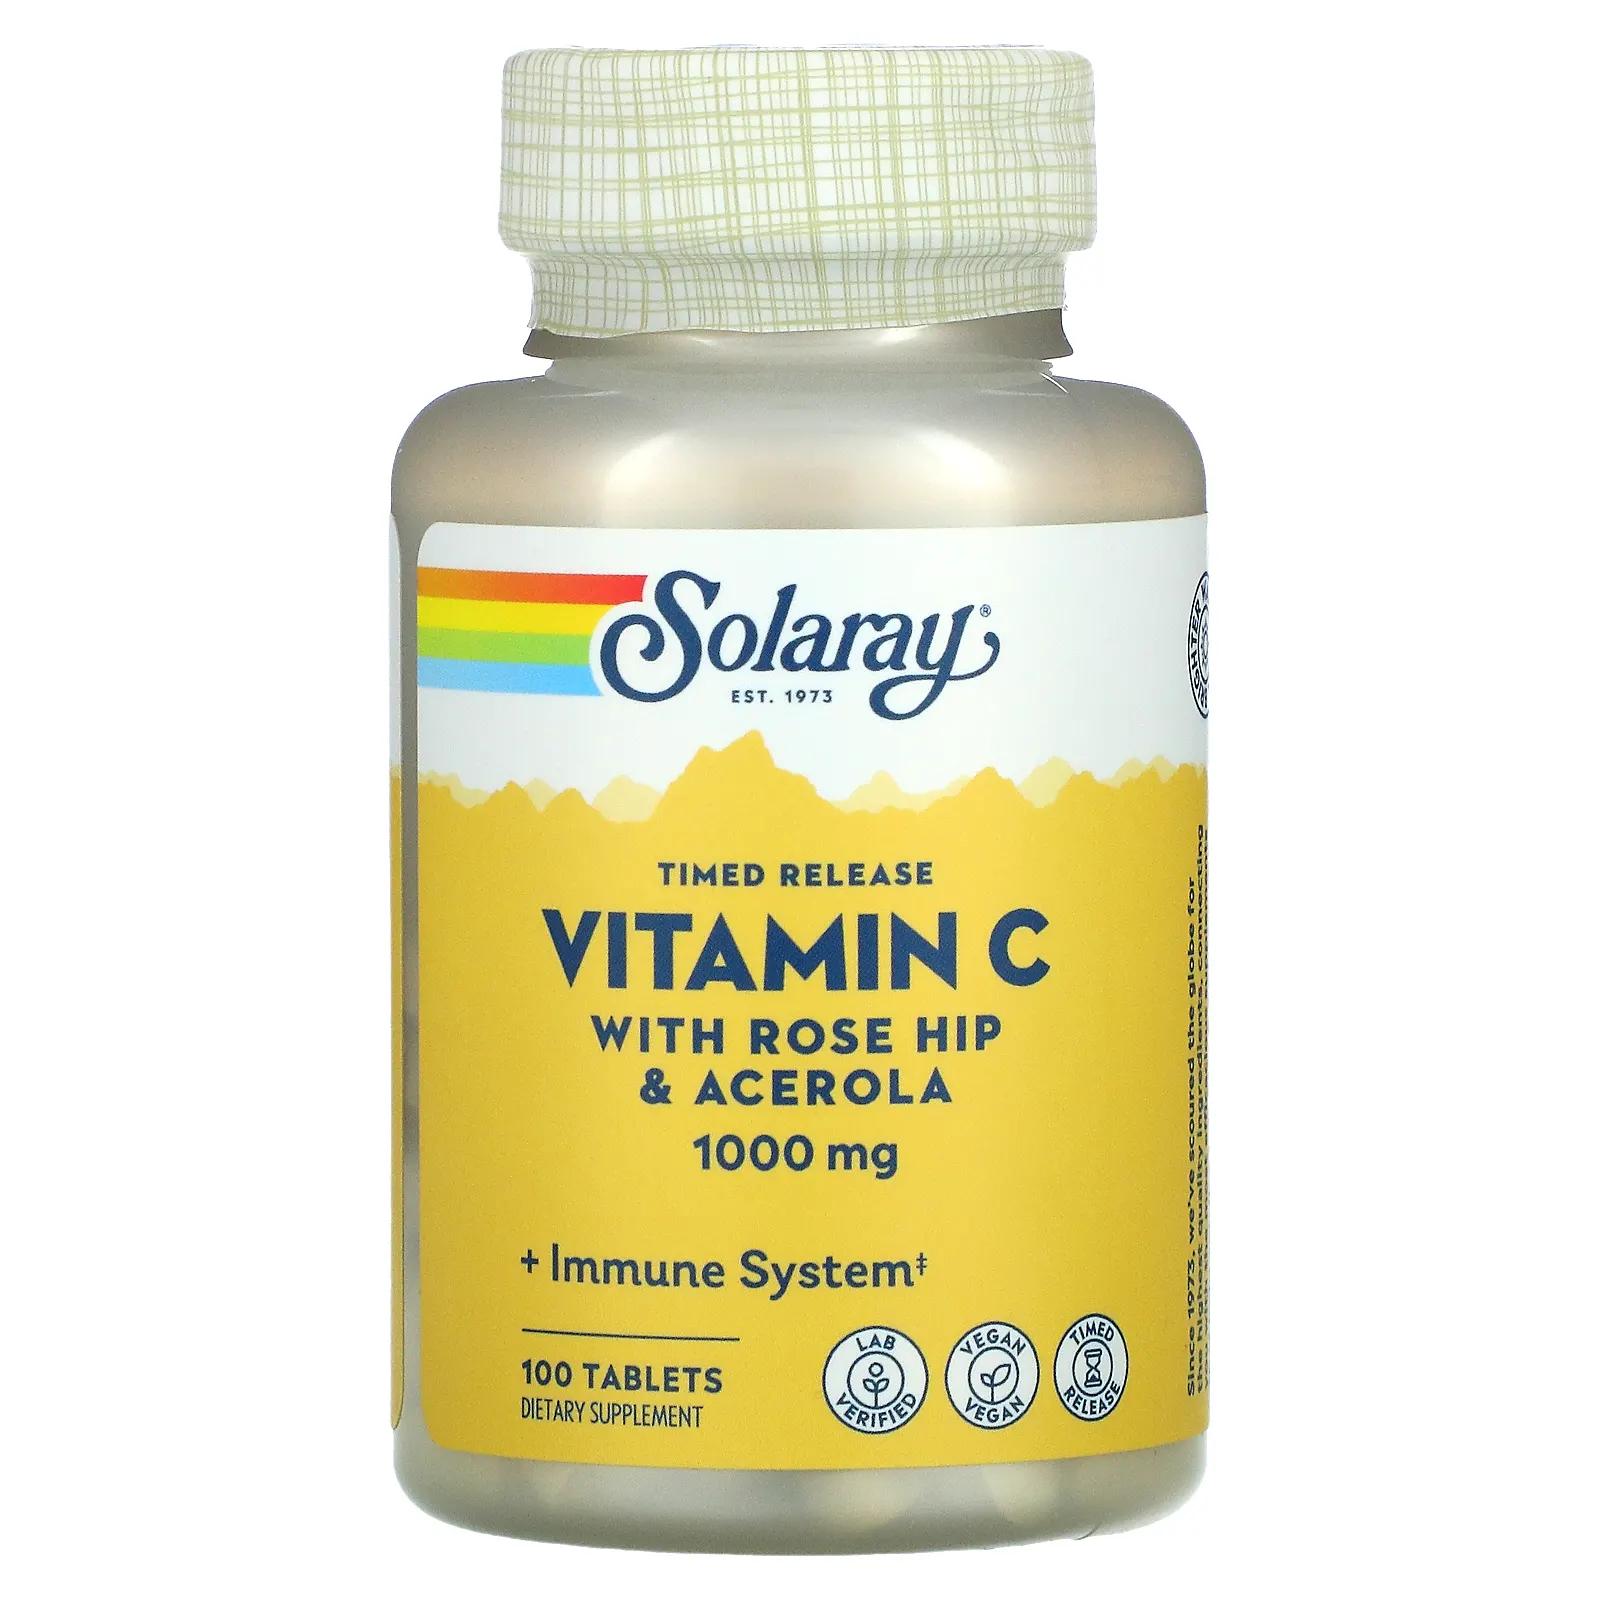 Solaray Vitamin C Timed-Release 1,000 mg 100 Tablets solaray timed release холин 300 мг 100 капсул